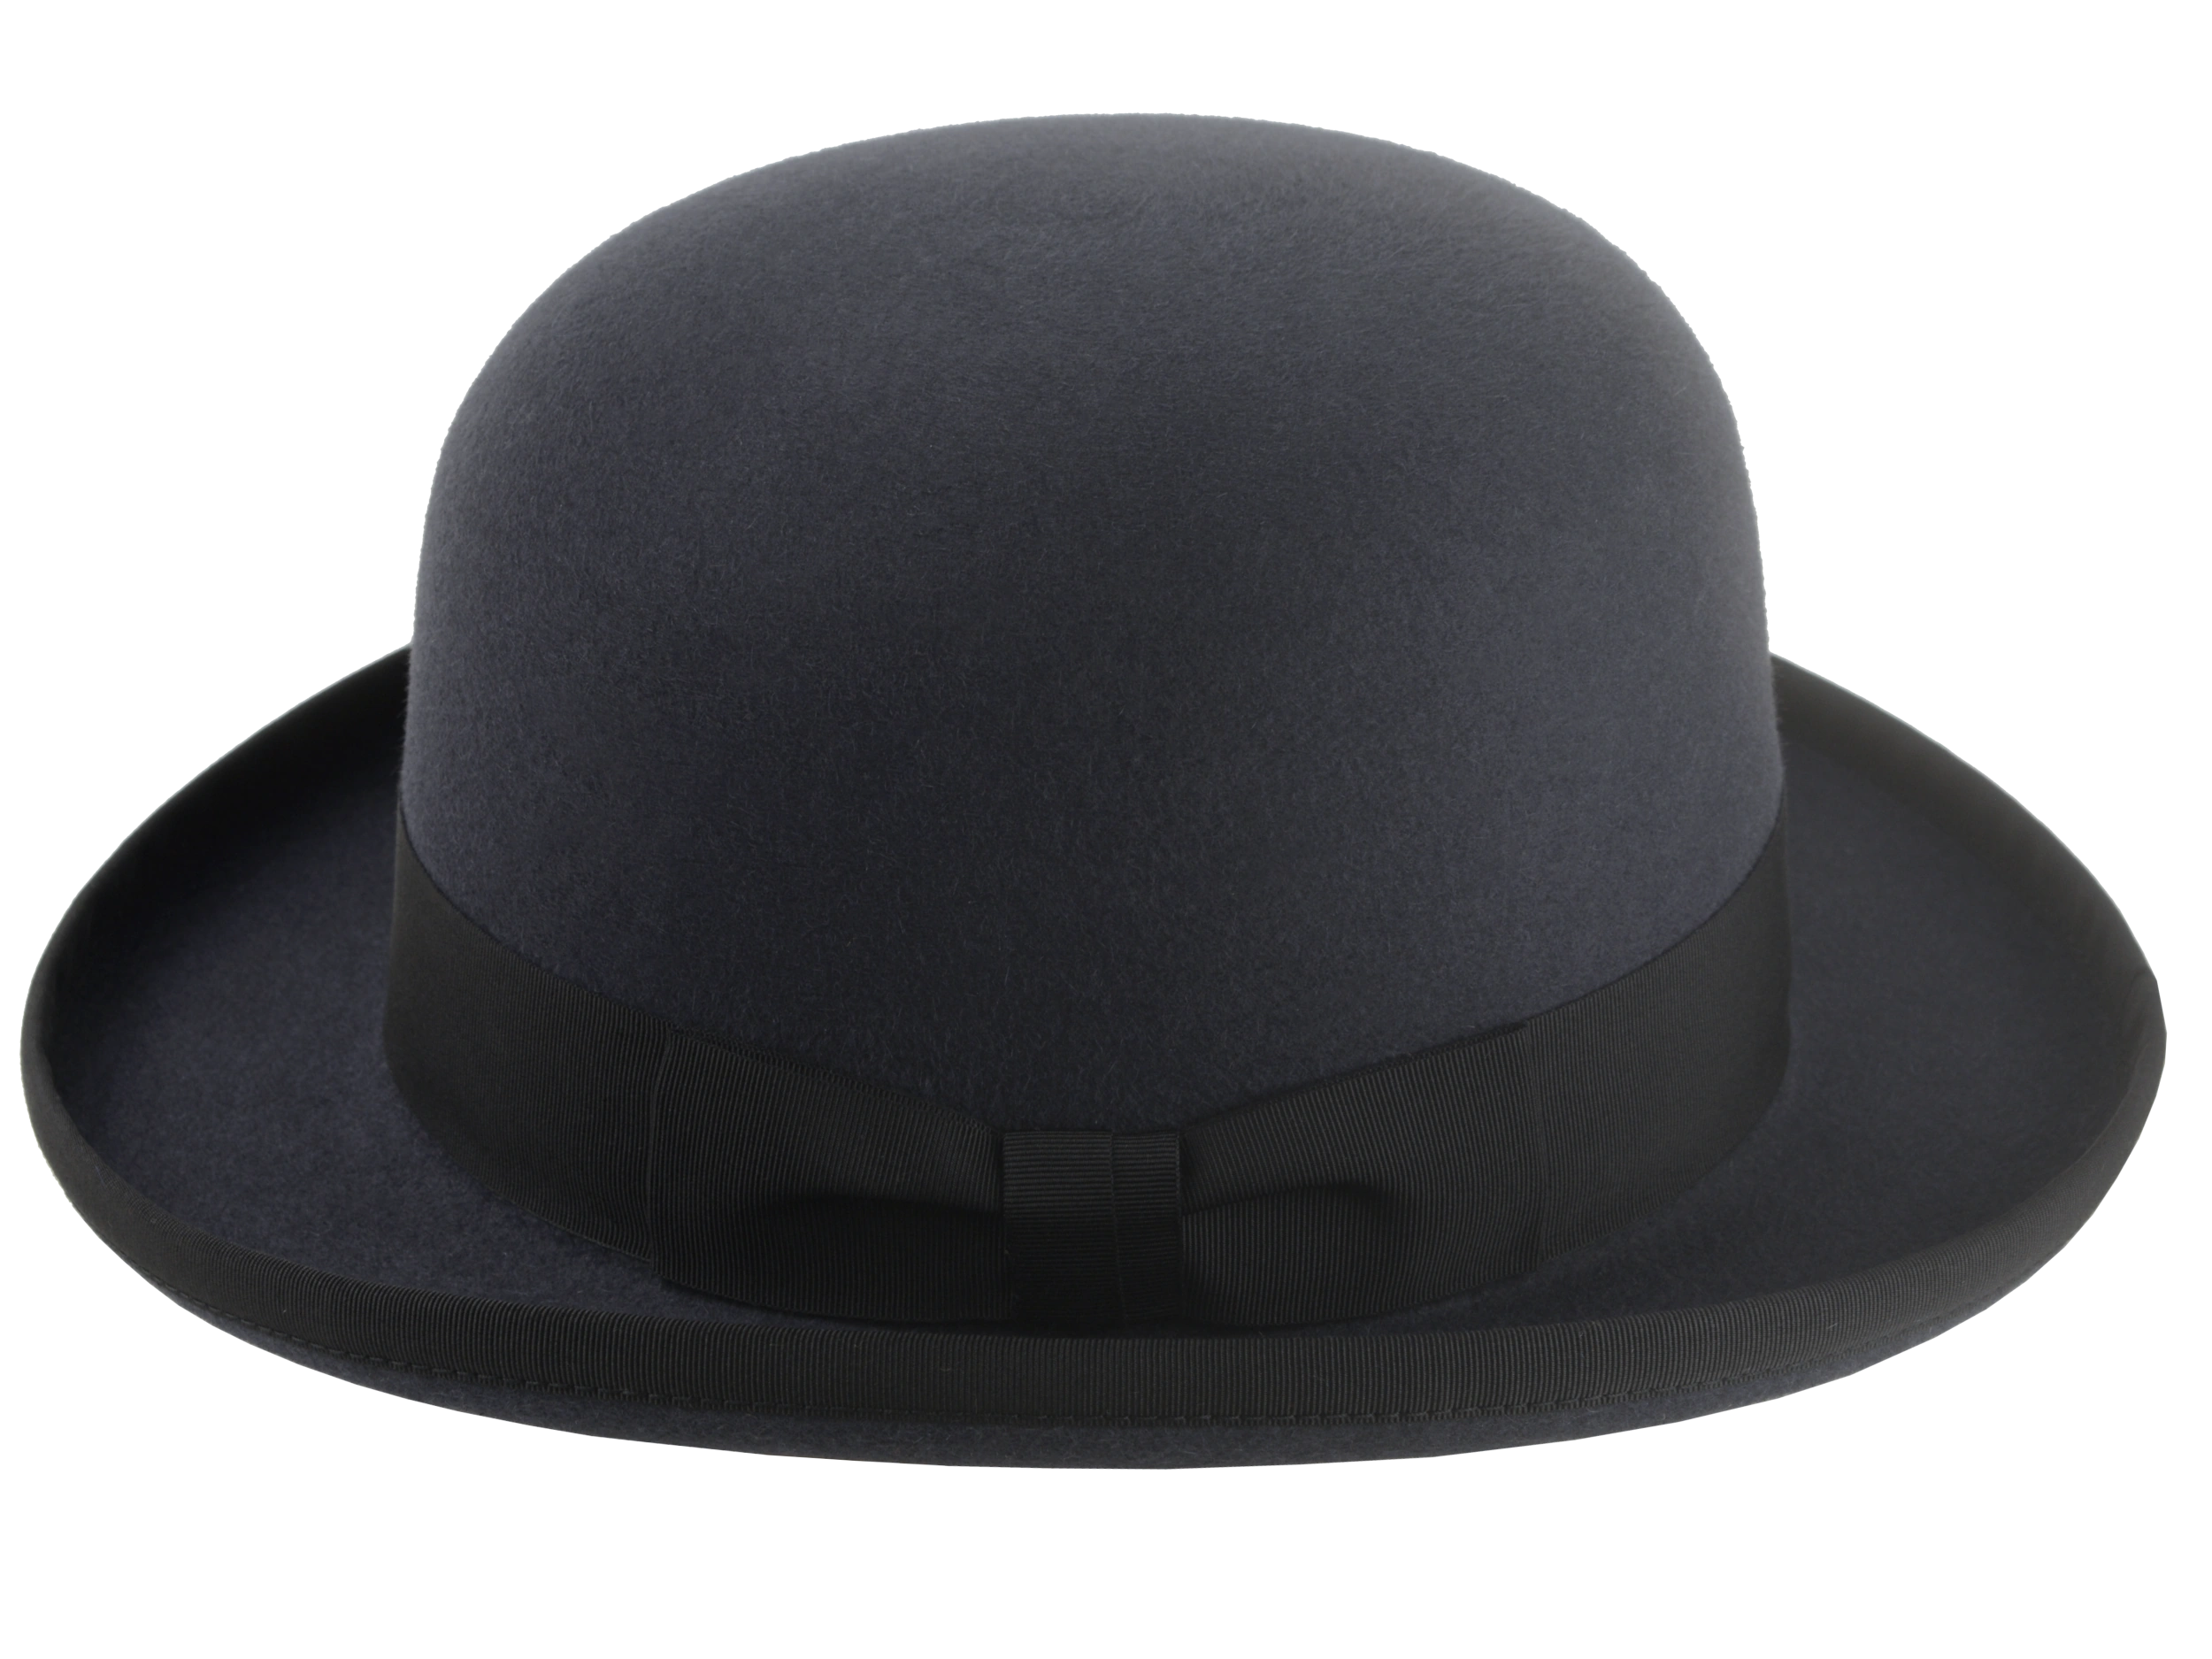 Side profile of the Jubilee bowler hat highlighting the 1 1/2" grosgrain ribbon hatband and the neatly rolled brim.